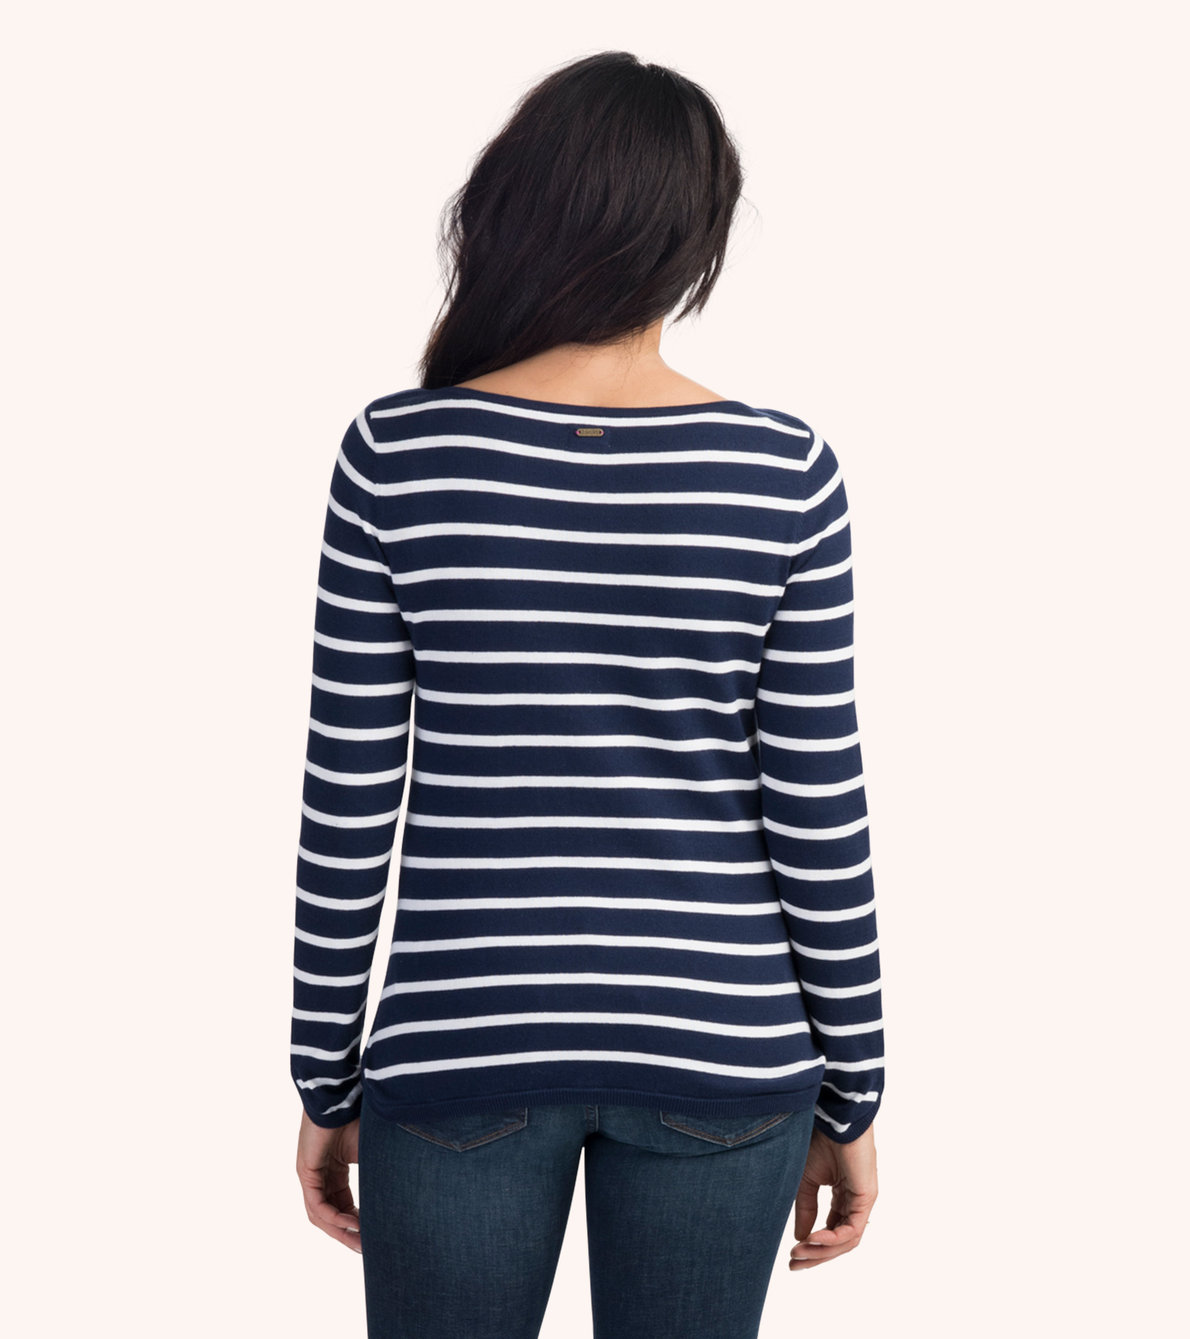 View larger image of Navy and White Stripes Breton Top